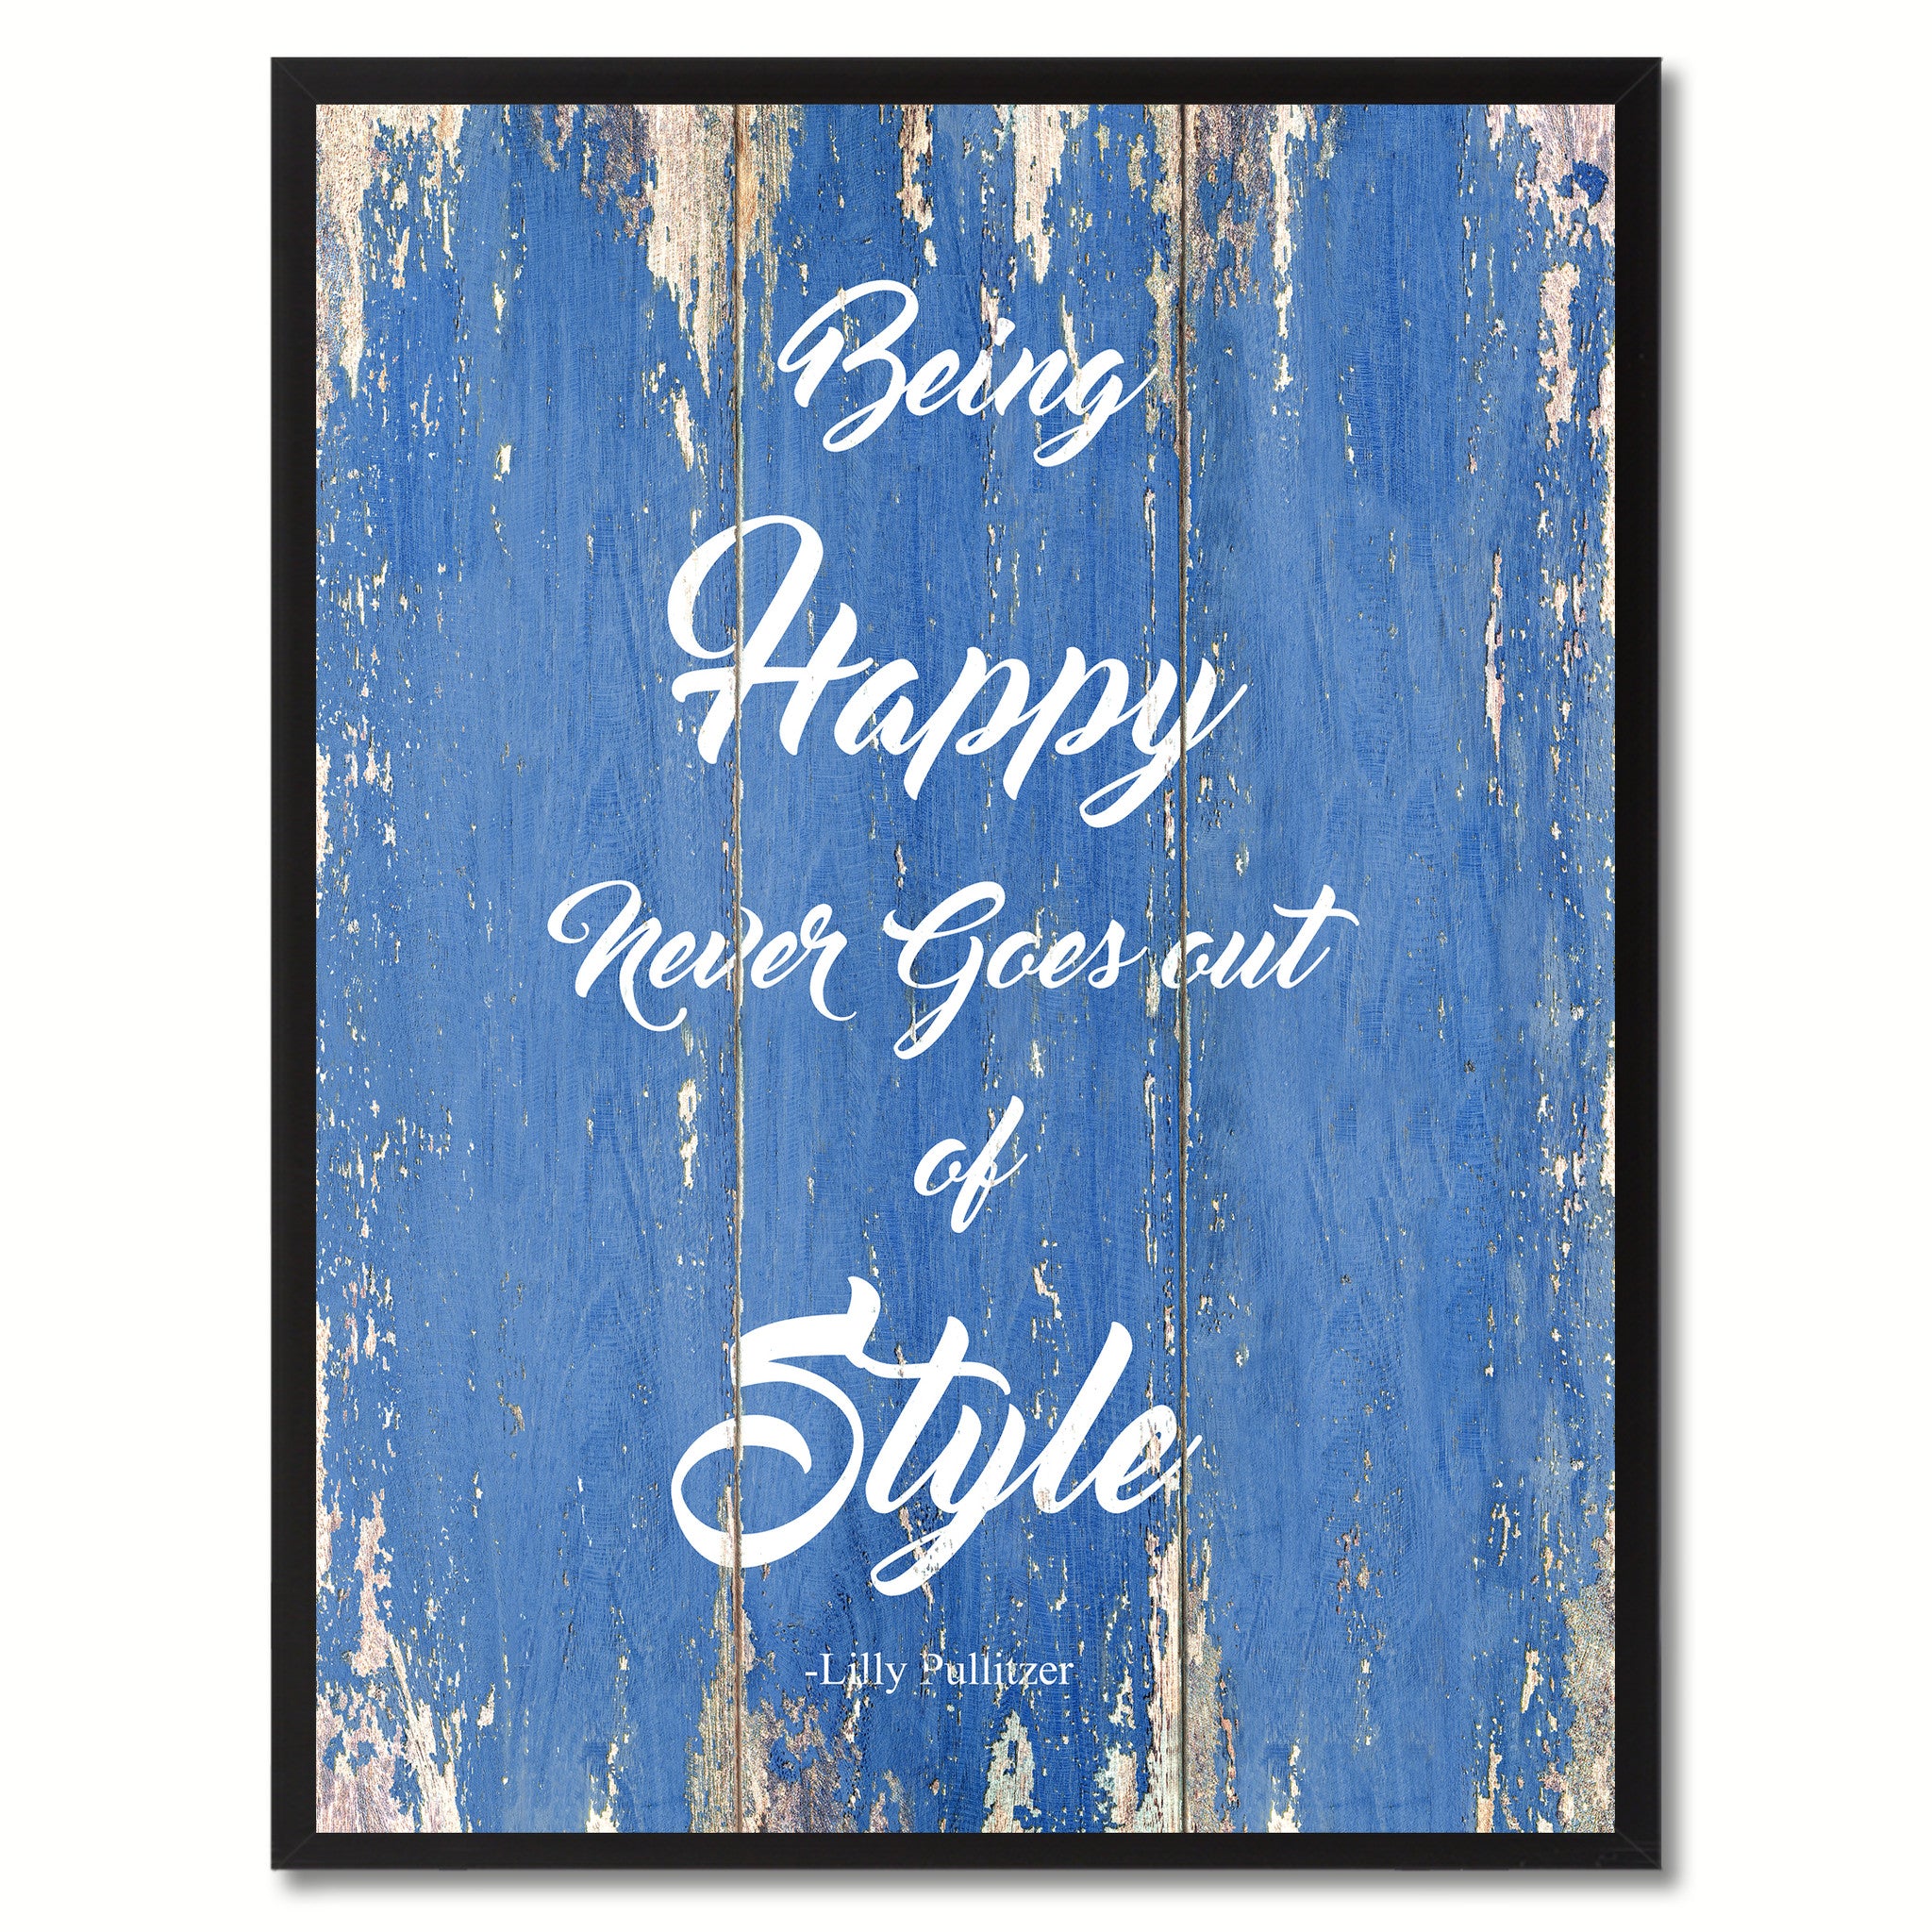 Being Happy Never Goes Out Of Style Lilly Pulitzer Saying Canvas Print, Black Picture Frame Home Decor Wall Art Gifts